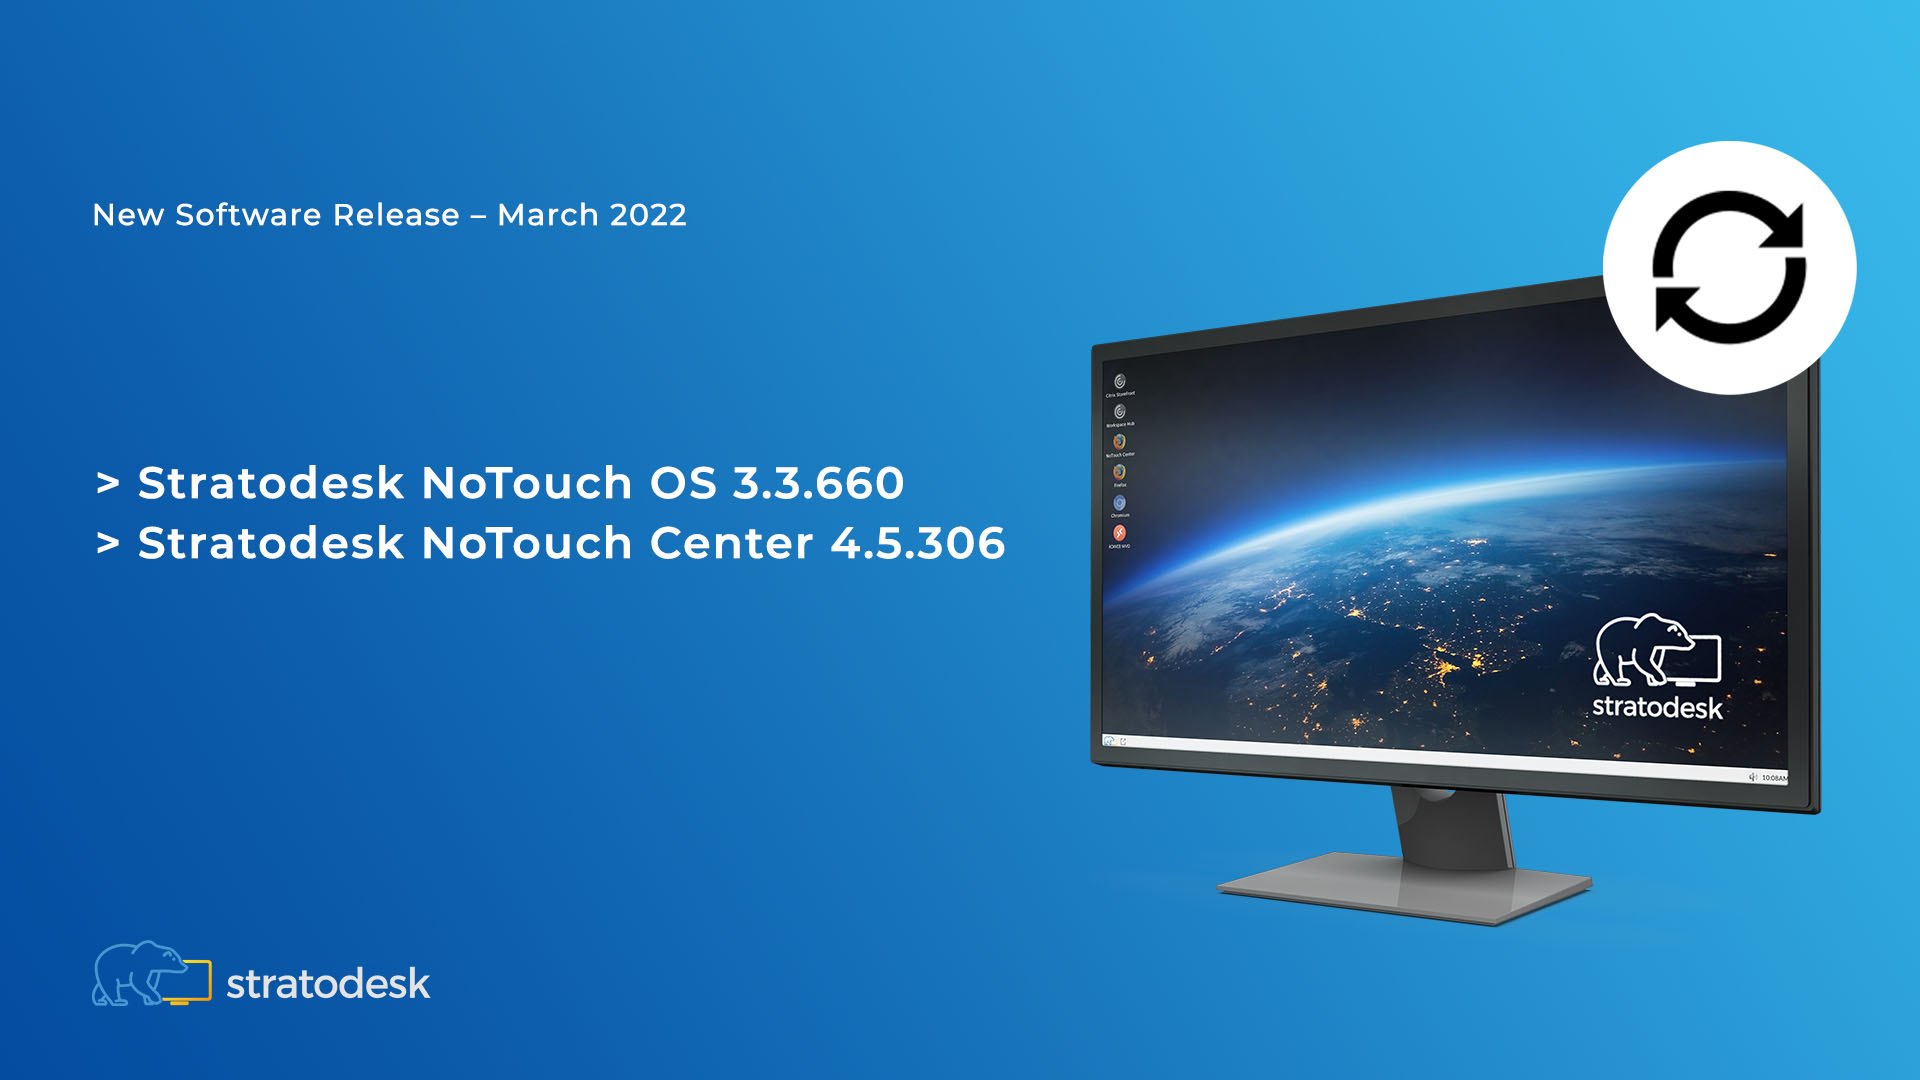 Introducing Stratodesk NoTouch OS 3.3.660 & NoTouch Center 4.5.306